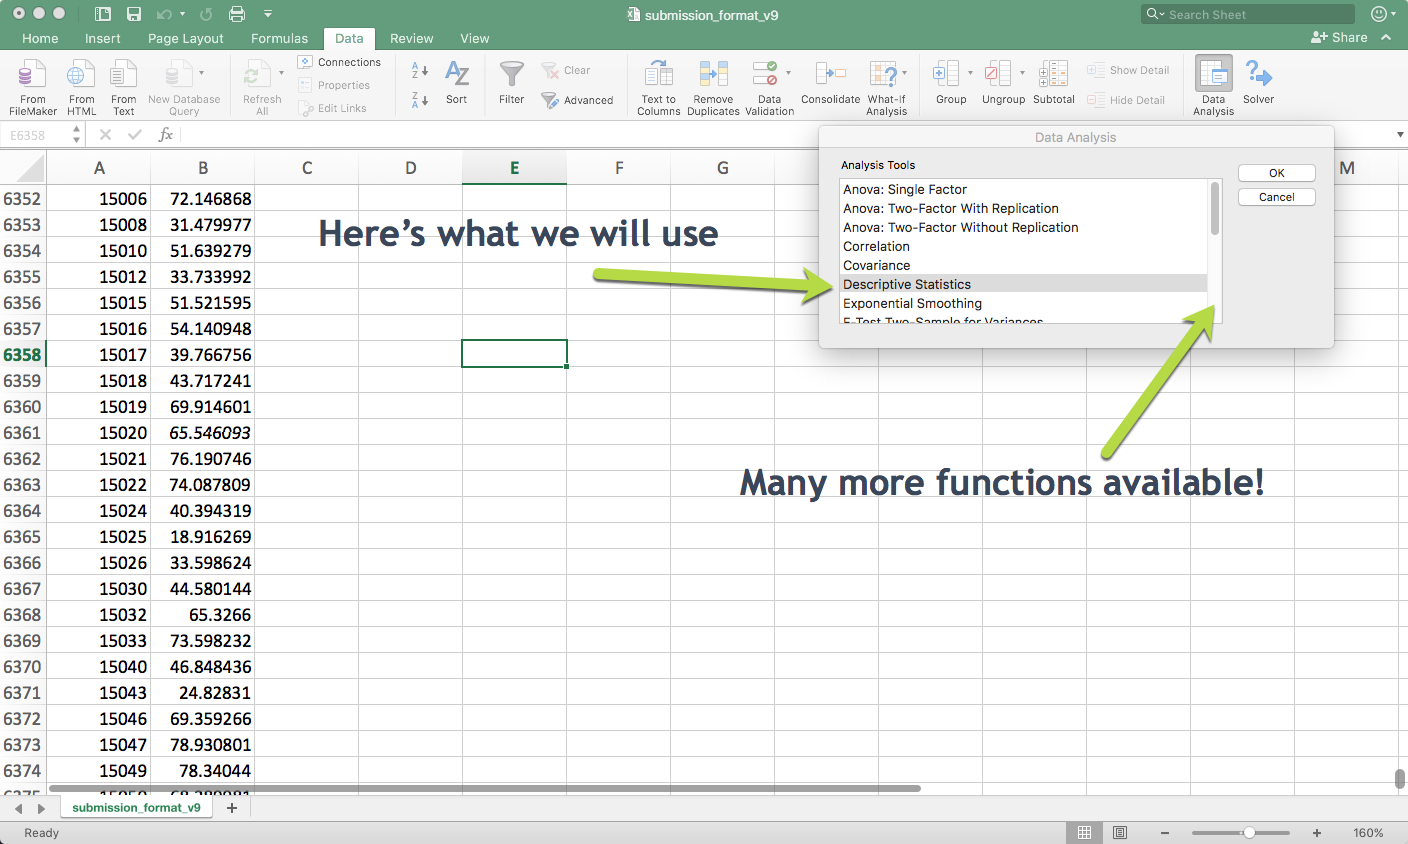 data analysis tool in excel 2013